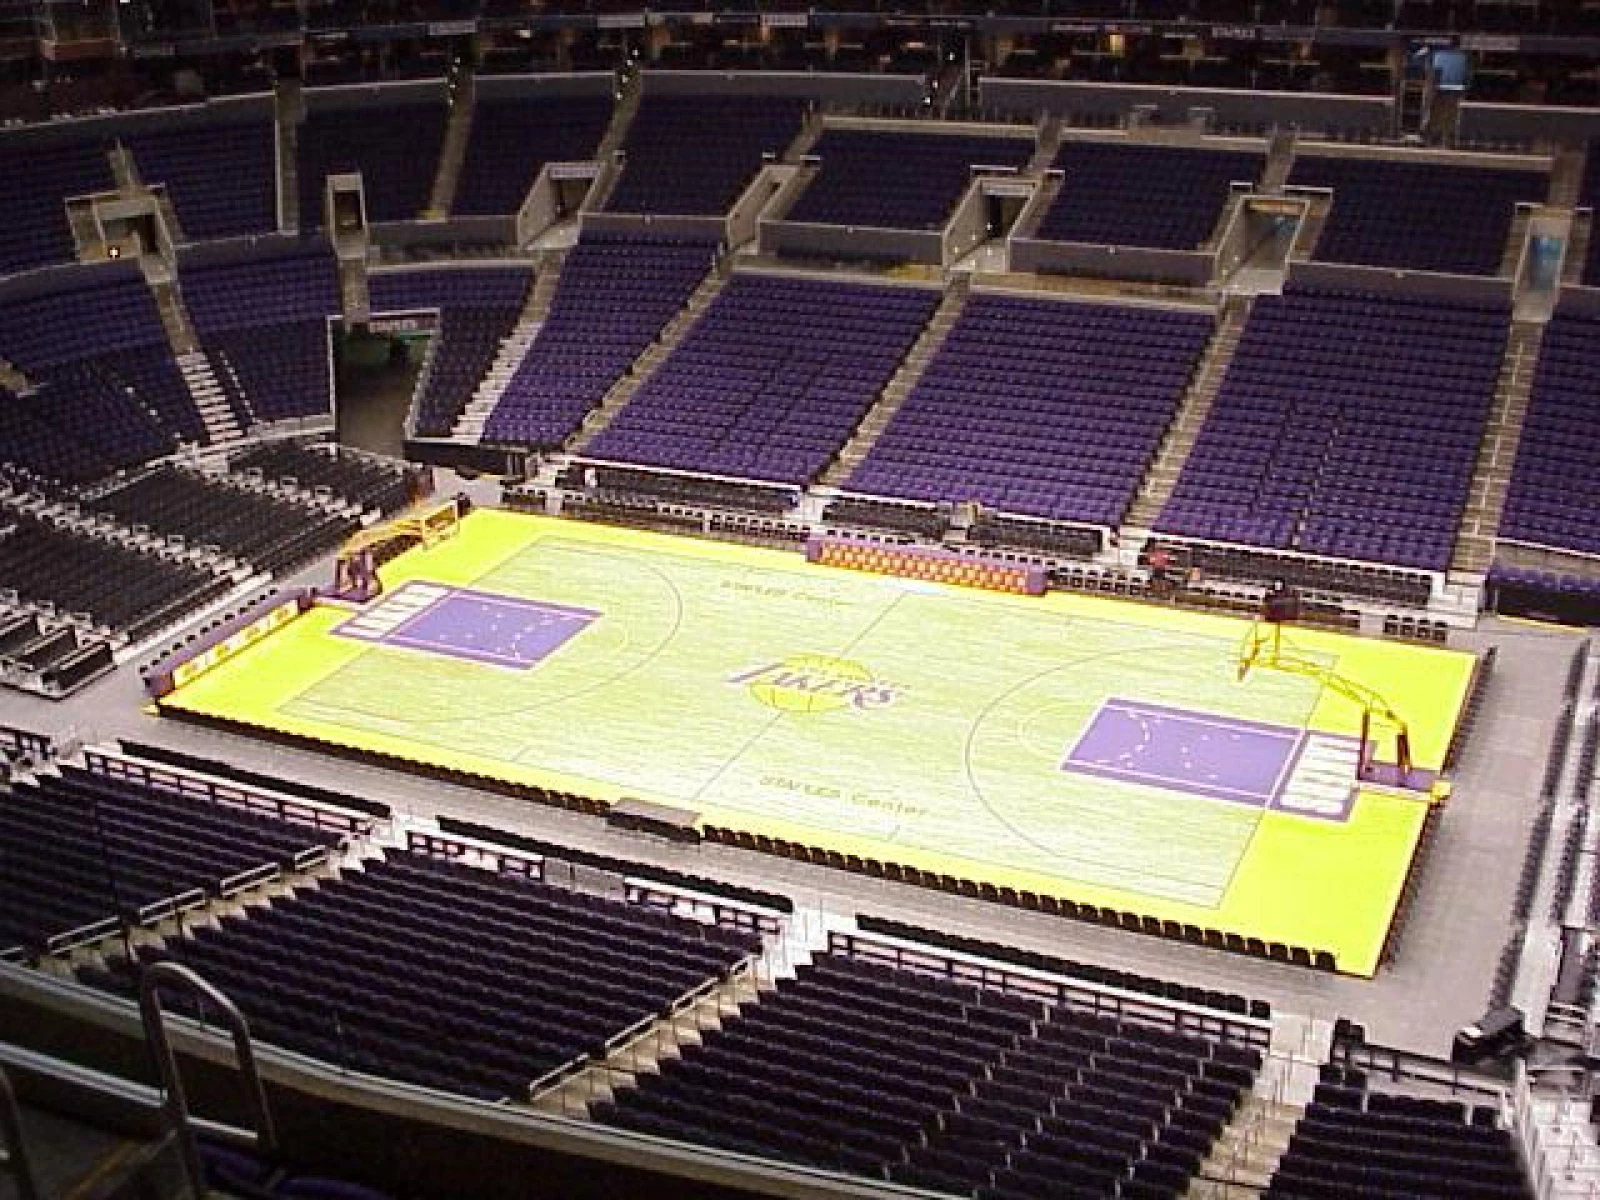 Los Angeles CA Basketball Court: Staples Center Courts of the World